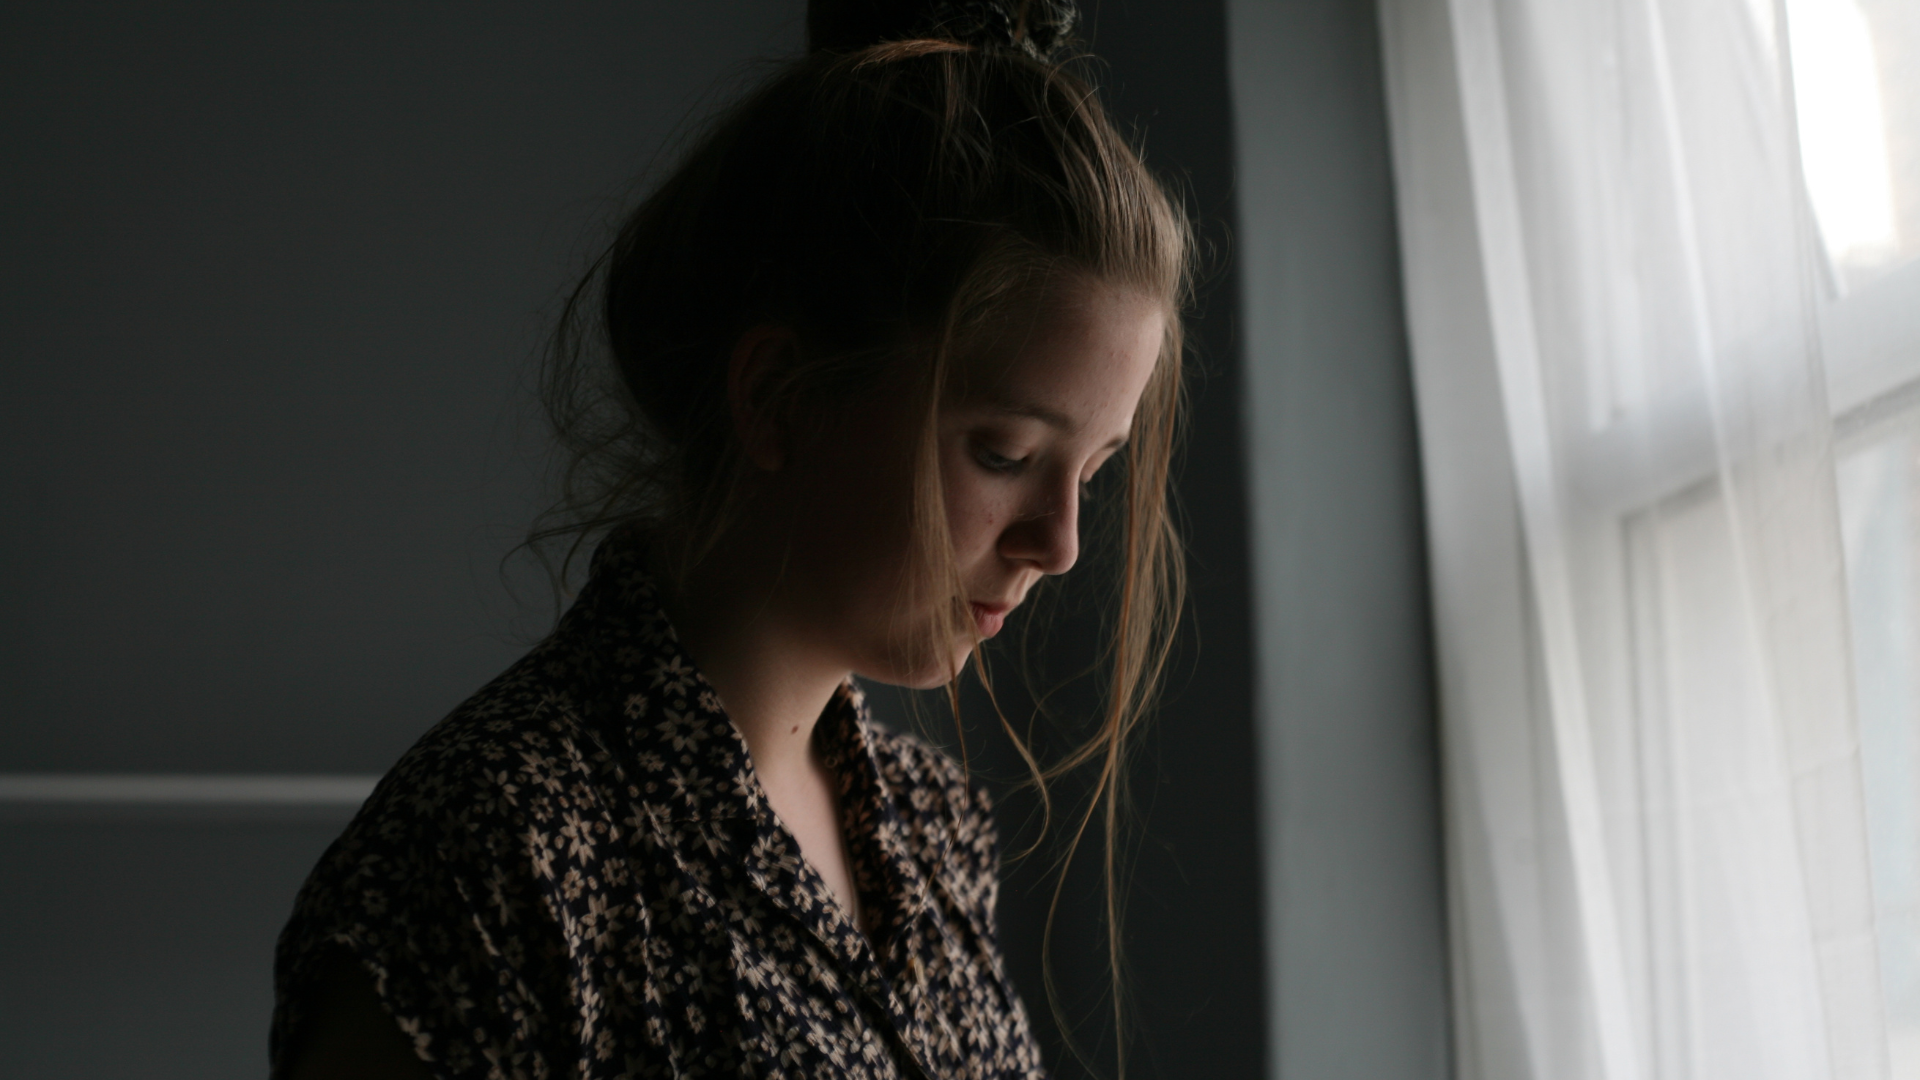 5 Tips To Survive a Breakup Without Losing Your Mind